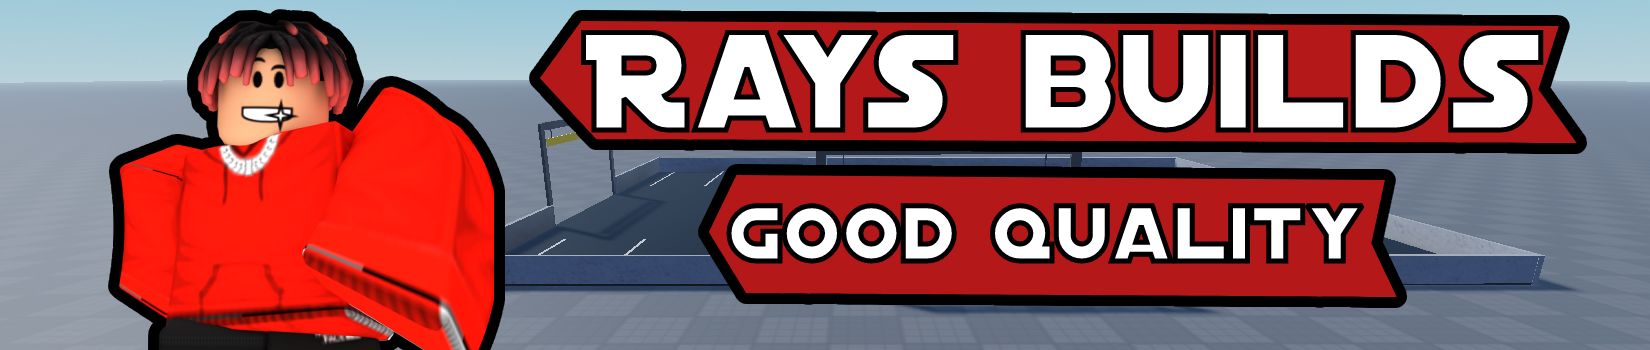 Rays Builds Sore